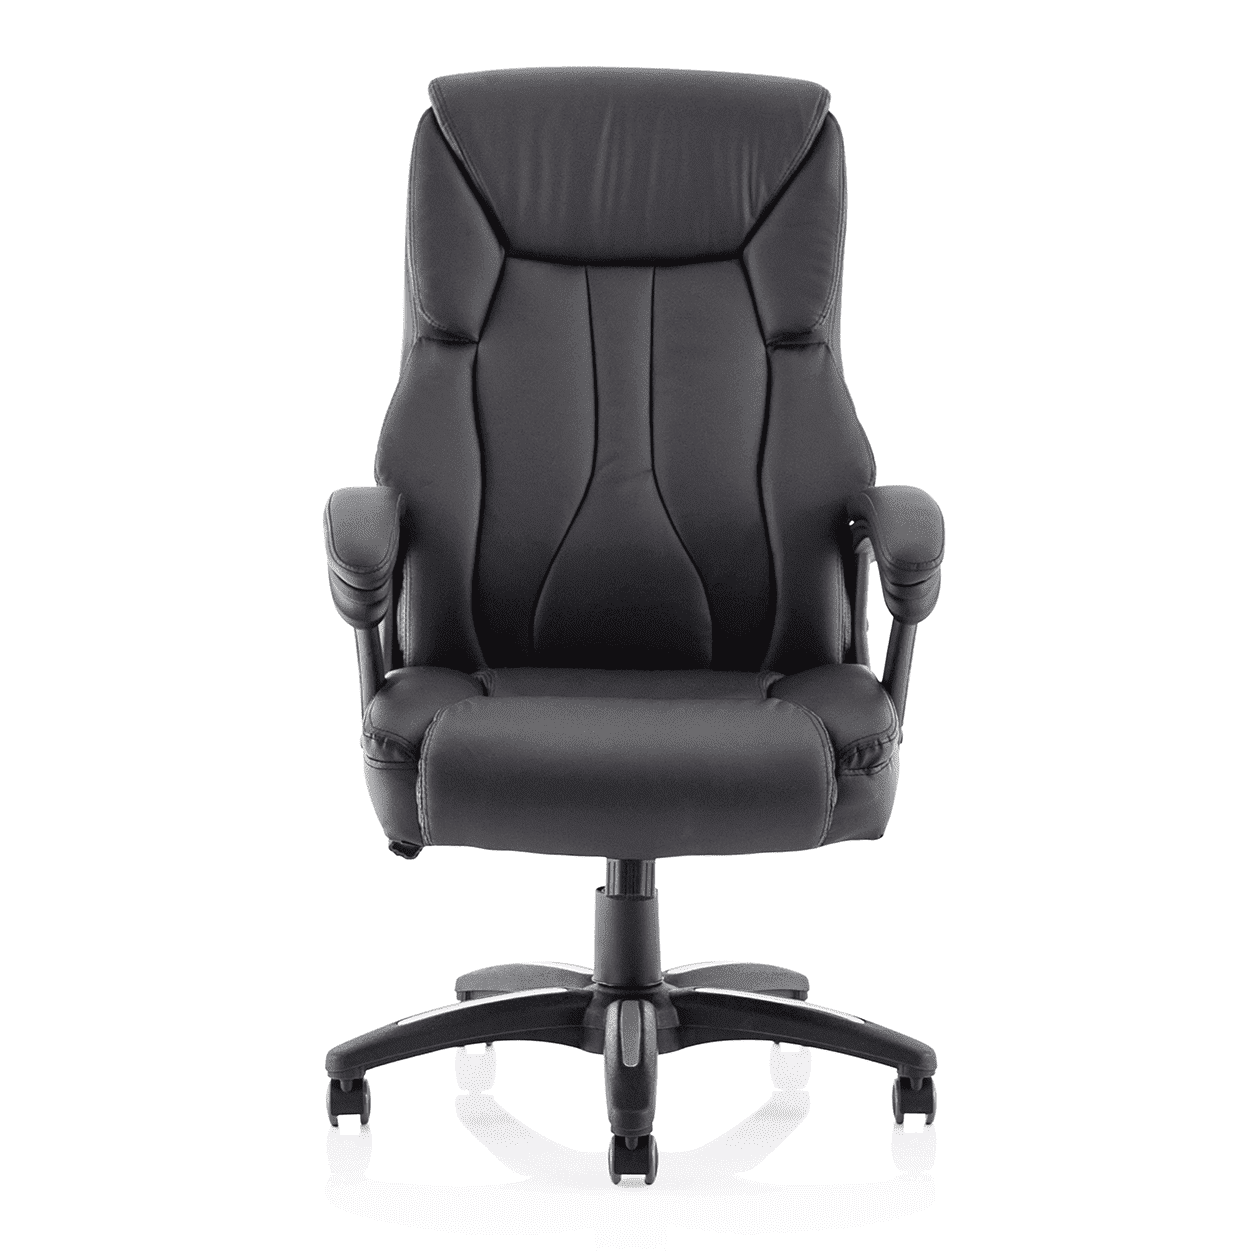 Stratford High Back Executive Office Chair - Black Leather, Chrome Metal Frame, Fixed Arms, 120kg Capacity, 8hr Usage, 1yr Warranty - Flat Packed